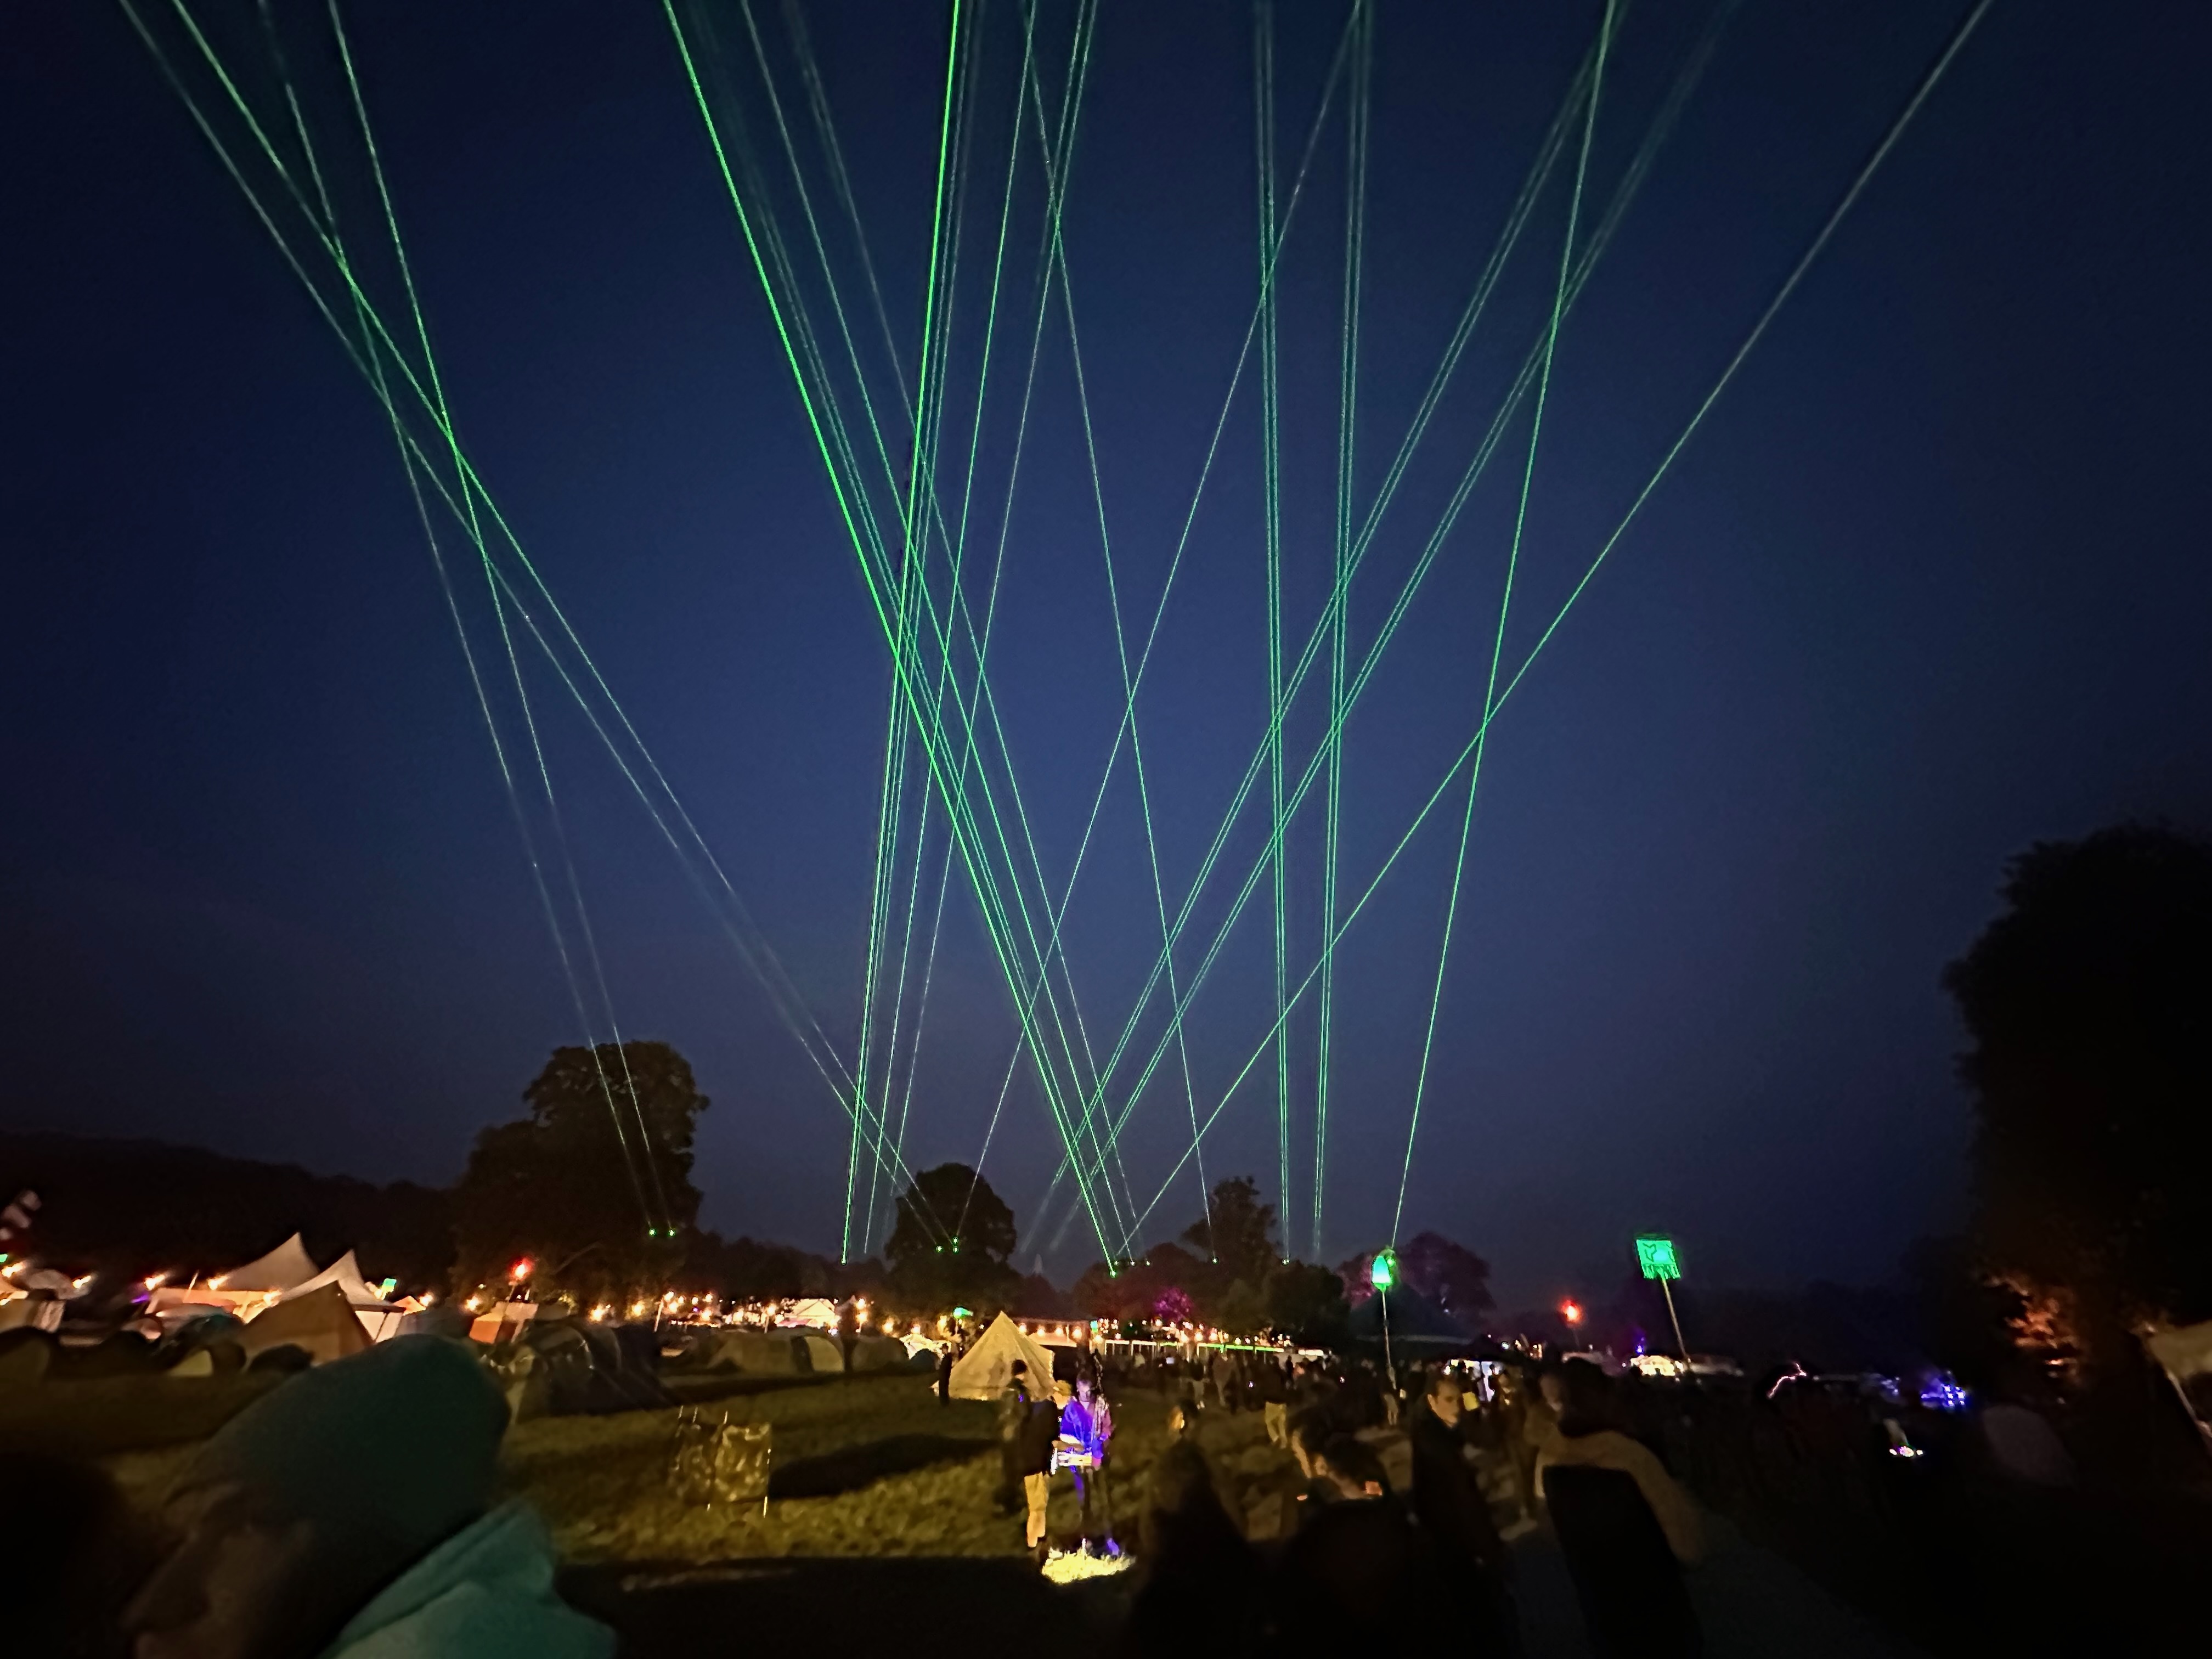 Green lasers light up the night sky above a campsite.